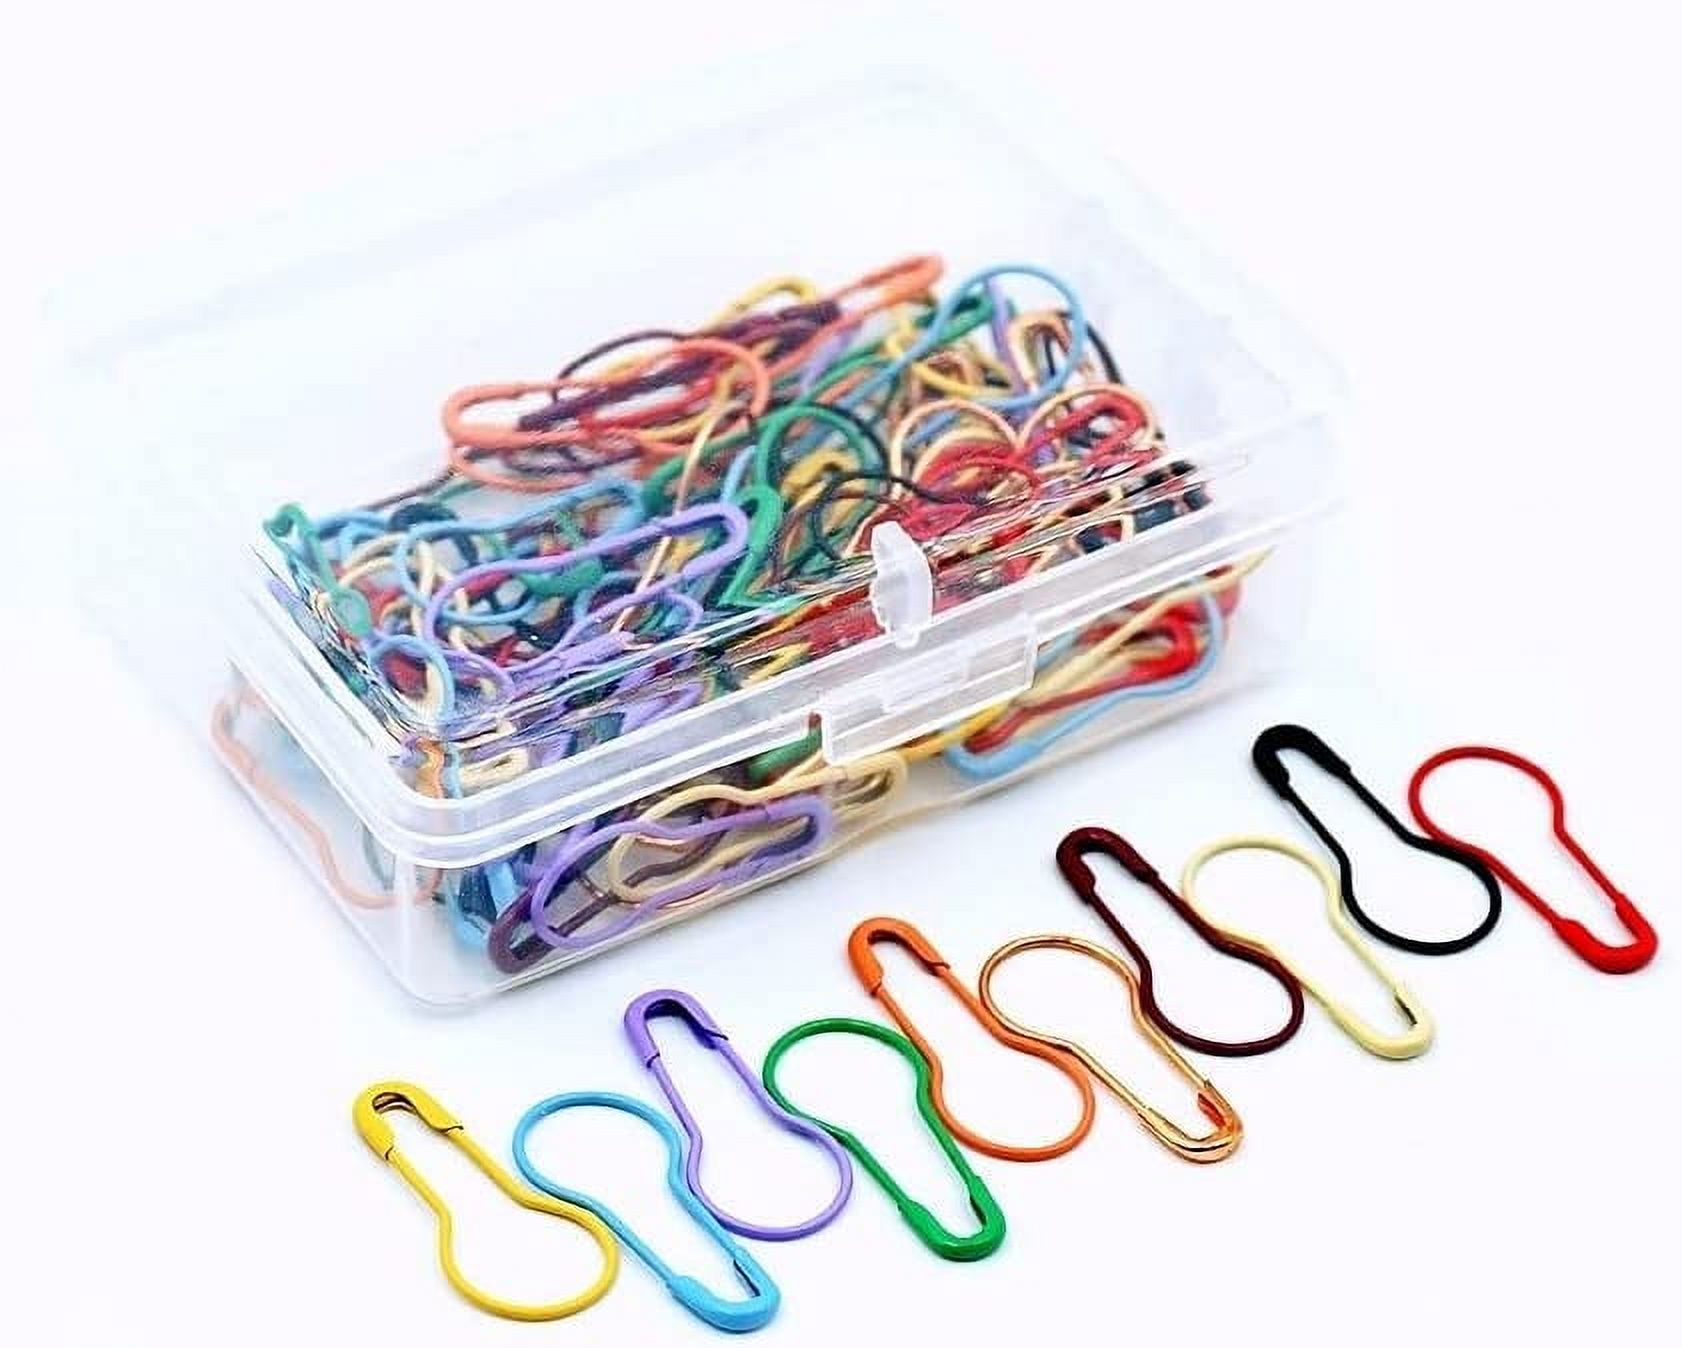 100 Pieces Safety Pins, Bulb Stitch Markers 10 Colors Assorted Metal Calabash Pins Pear Shape Knitting Pins for Crocheting Clothing Tag DIY Craft